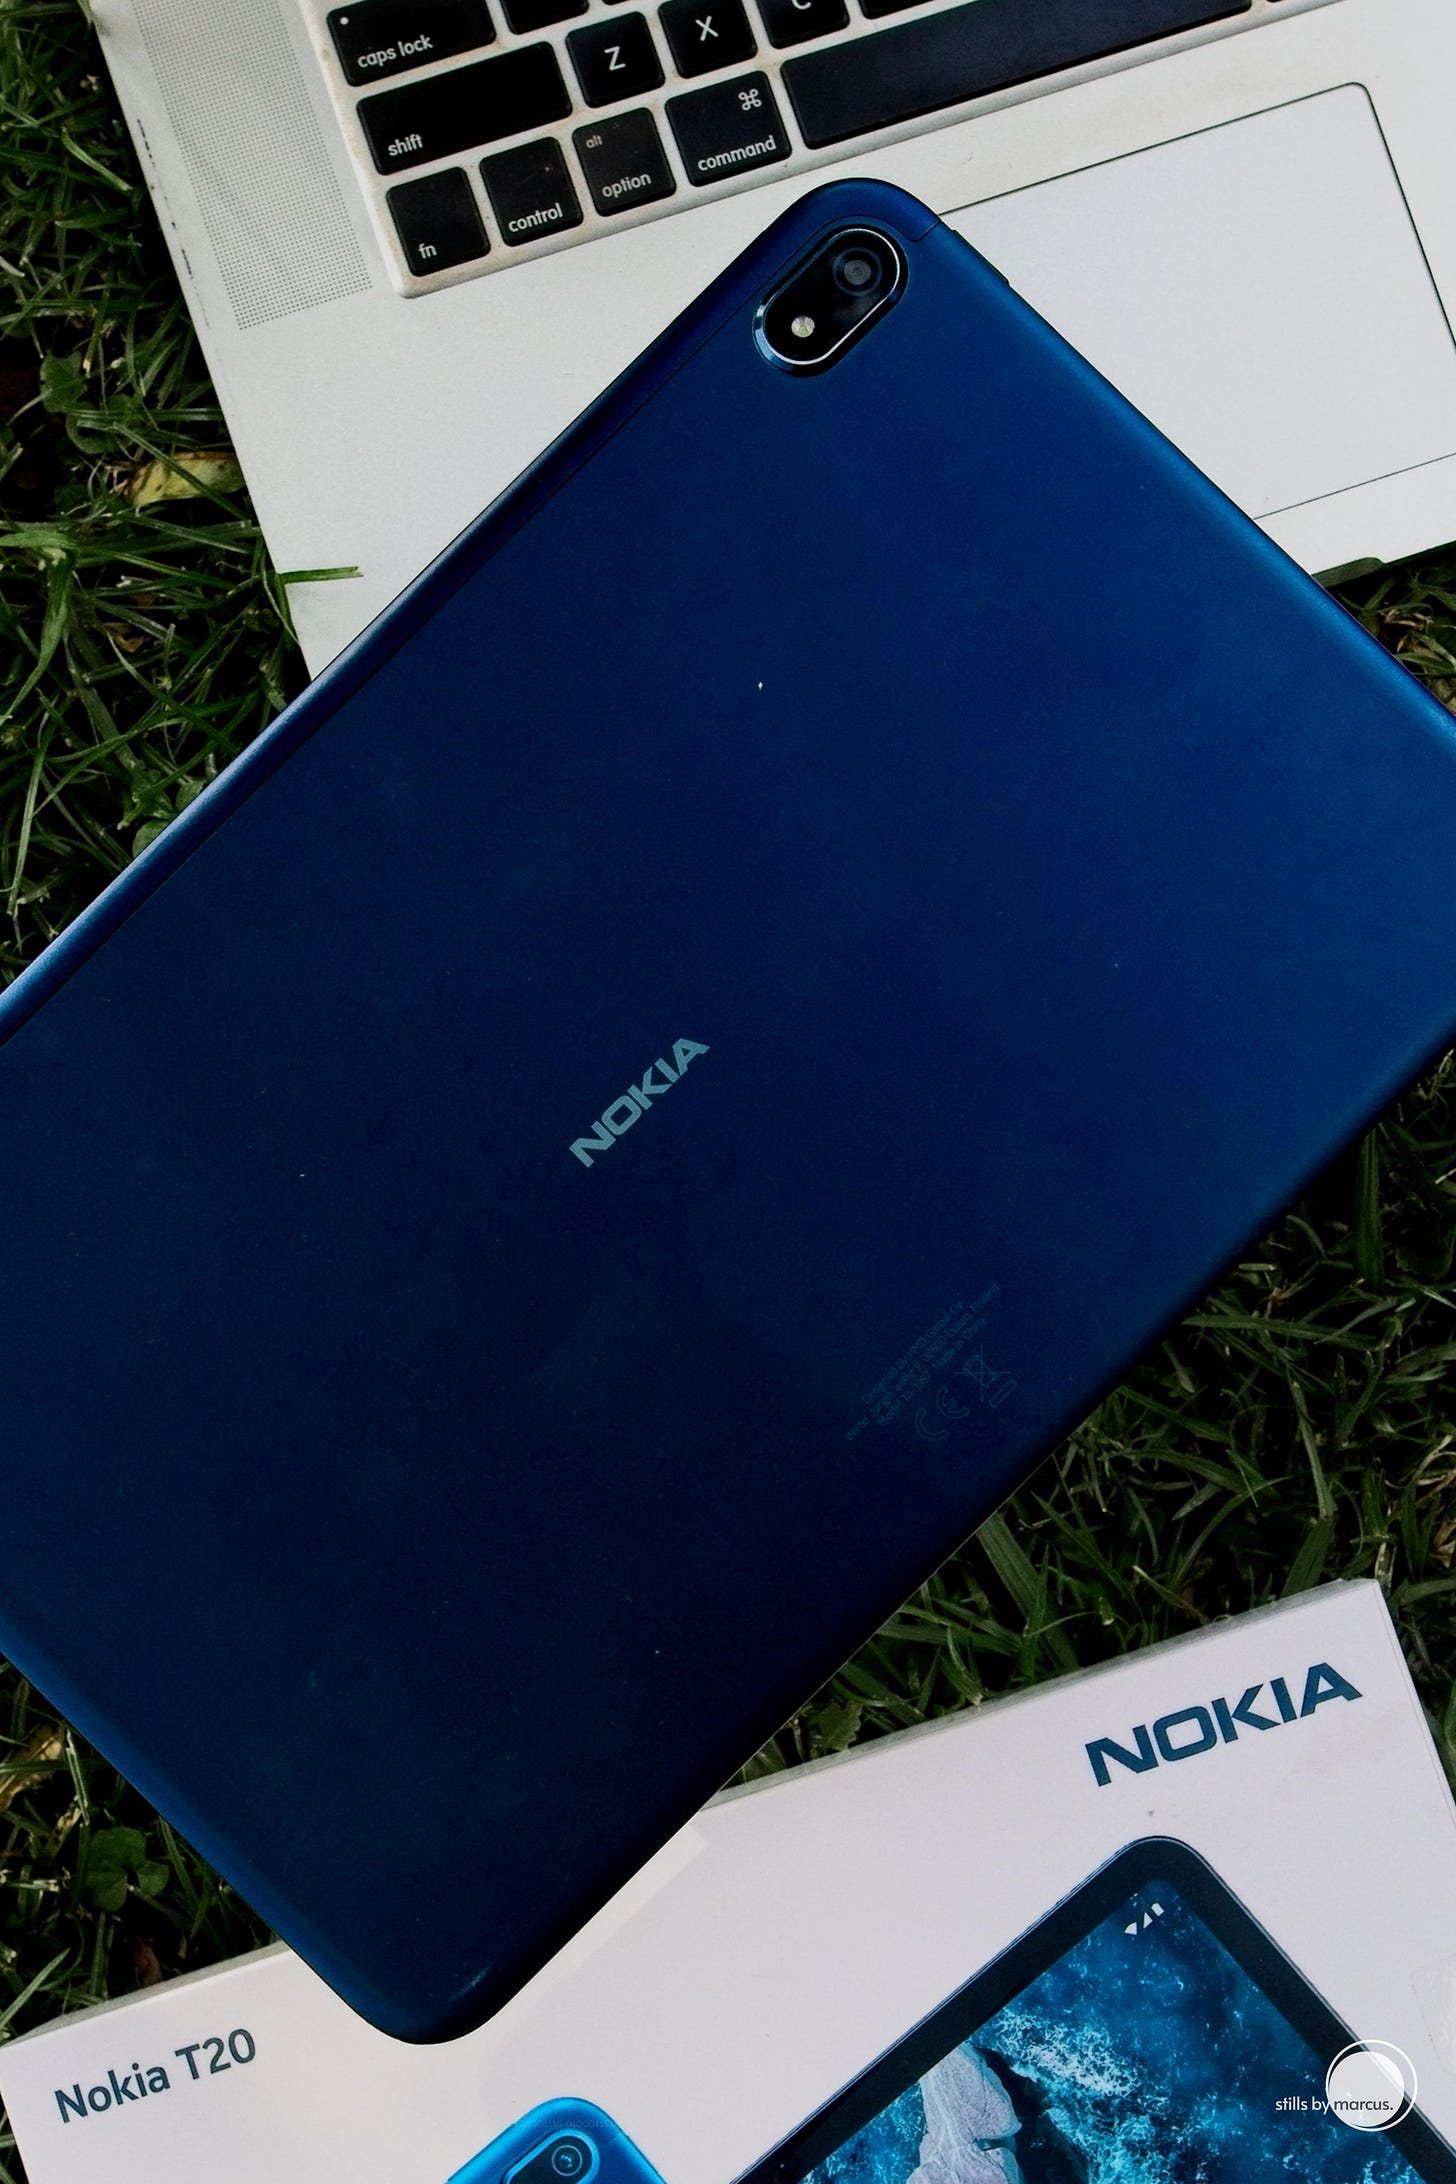 The Nokia T20. Test device provided by Nokia Mobile. Photo by Marcus Olang’ (Stills by Marcus).